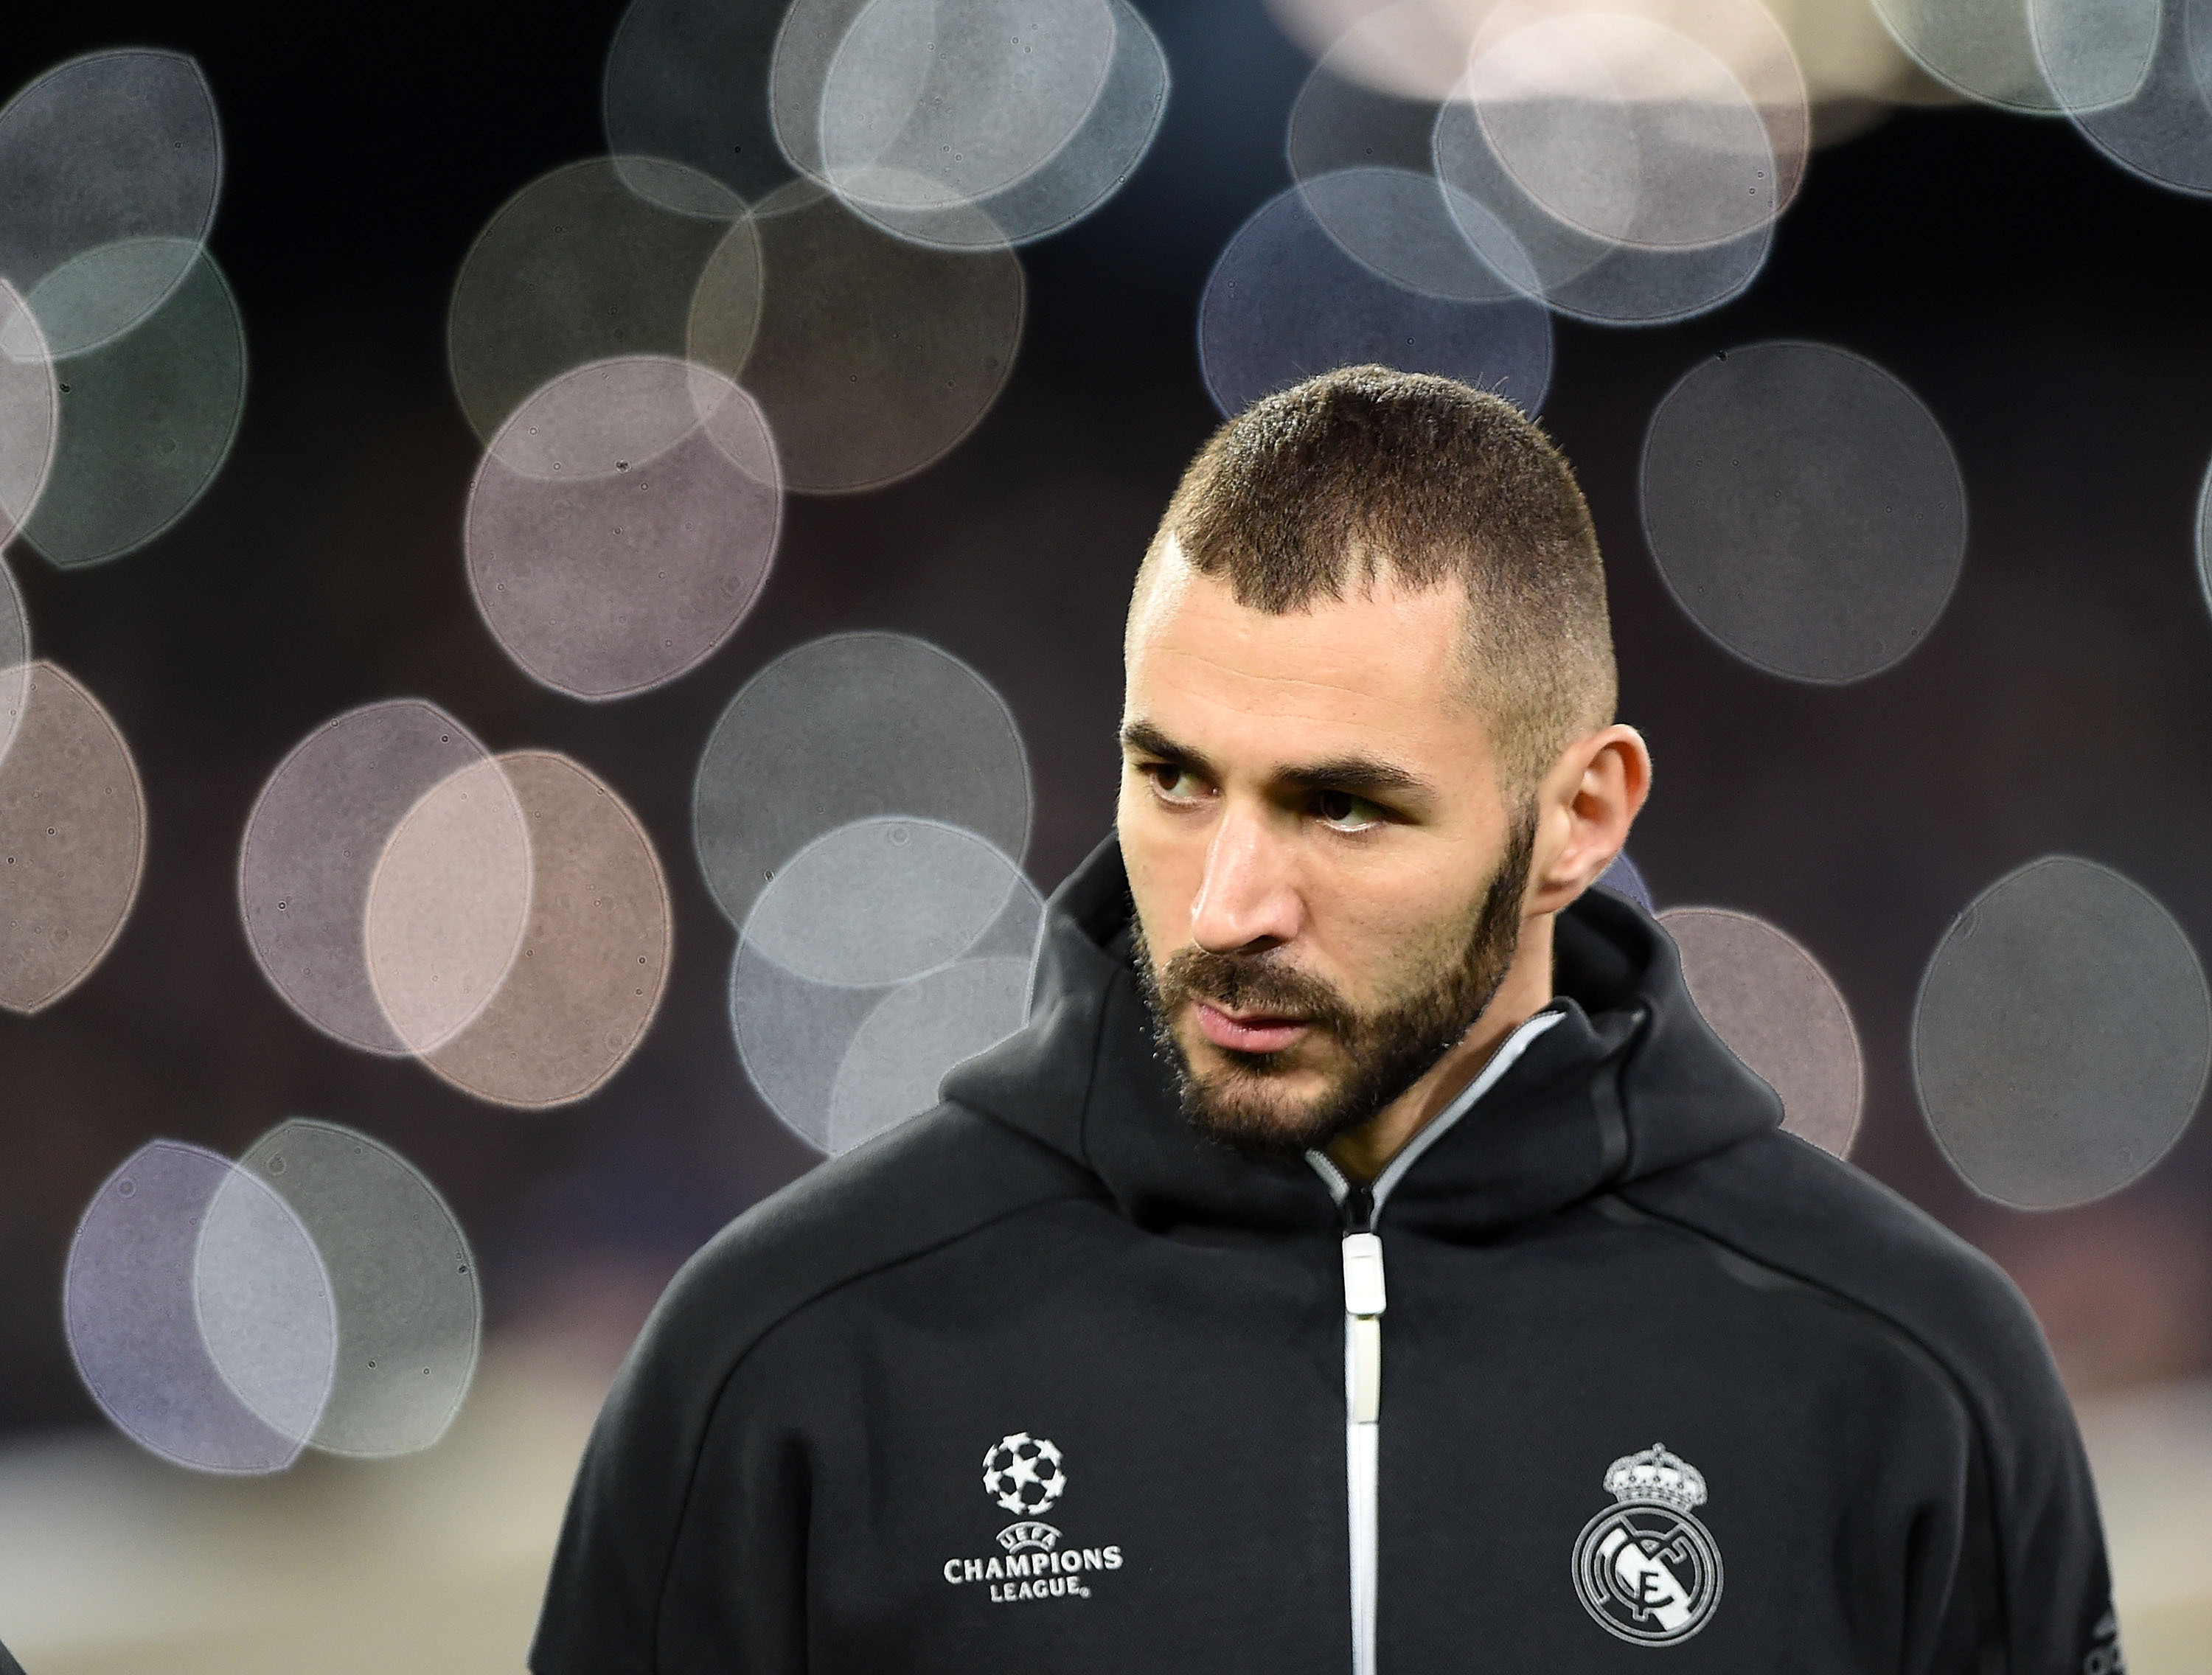 NAPLES, ITALY - MARCH 07: Karim Benzema of Real Madrid CF in action during the UEFA Champions League Round of 16 second leg match between SSC Napoli and Real Madrid CF at Stadio San Paolo on March 7, 2017 in Naples, Italy.  (Photo by Francesco Pecoraro/Getty Images)